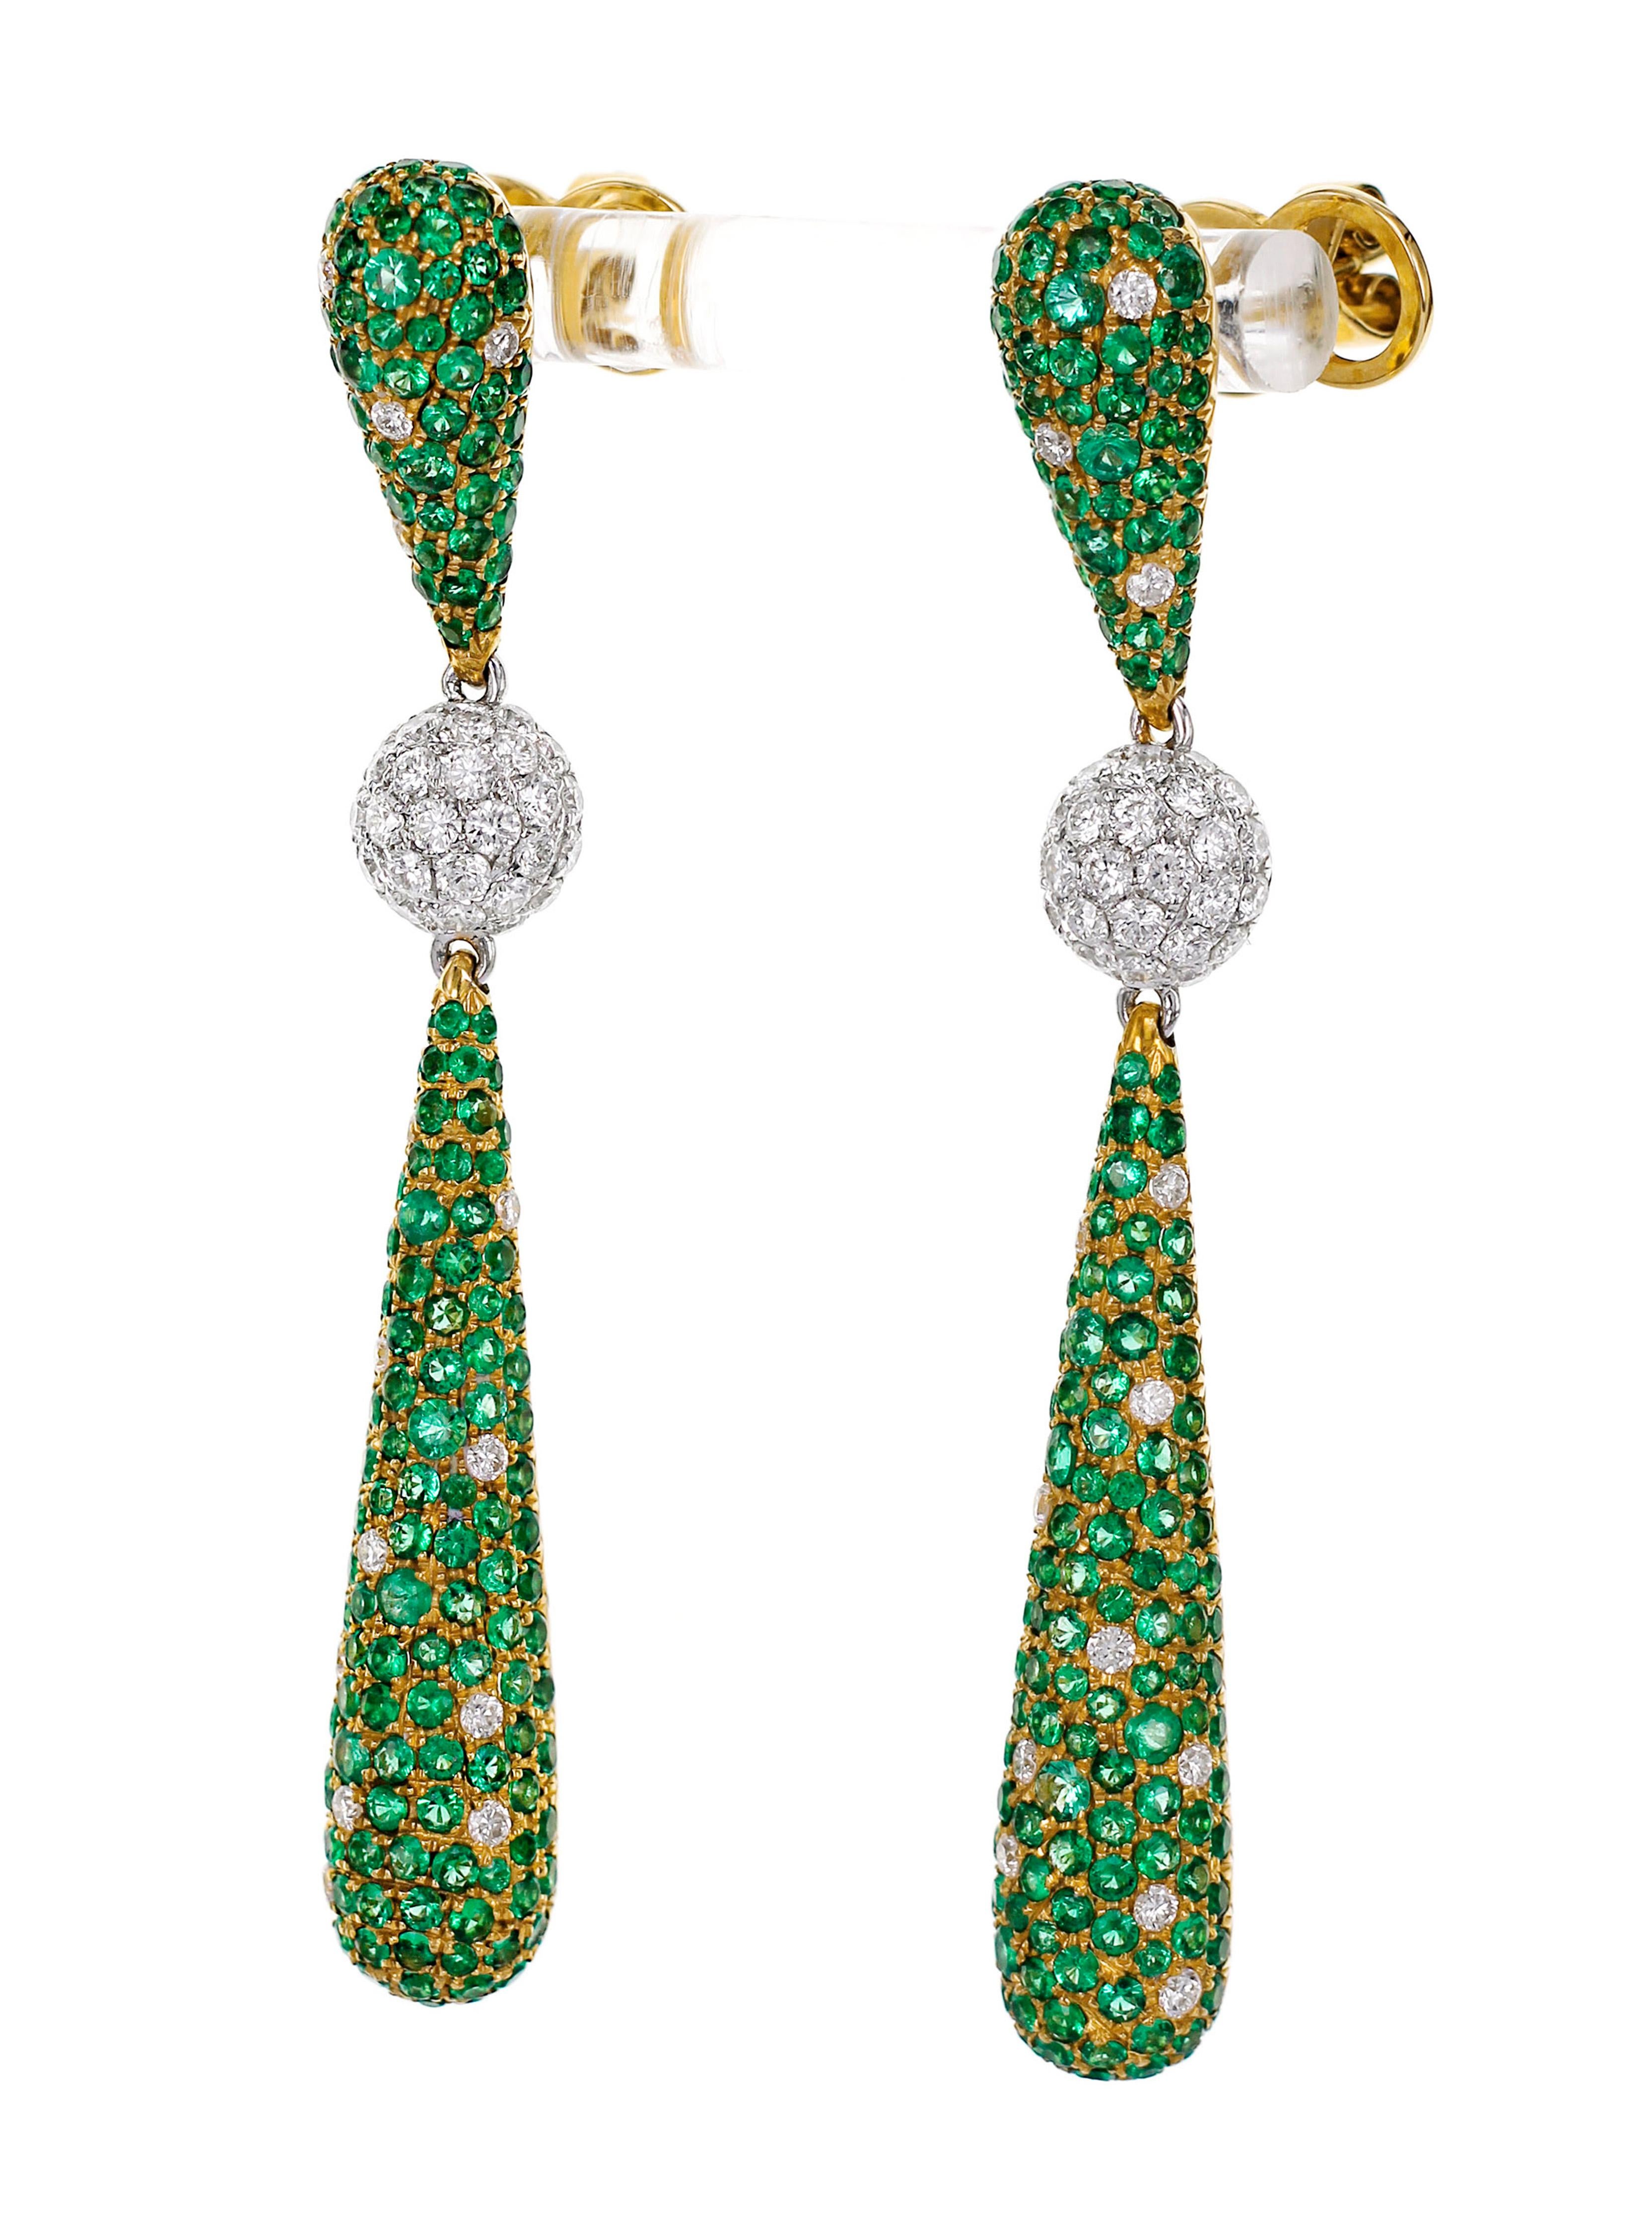 Vibrant 4.13 carat of Colombian emerald with 1.65 carat of F color VS clarity round white brilliant diamonds are studded in this classic dangle earring. 
With an intricate honeycomb backing, this earring will be head turner from all sides.